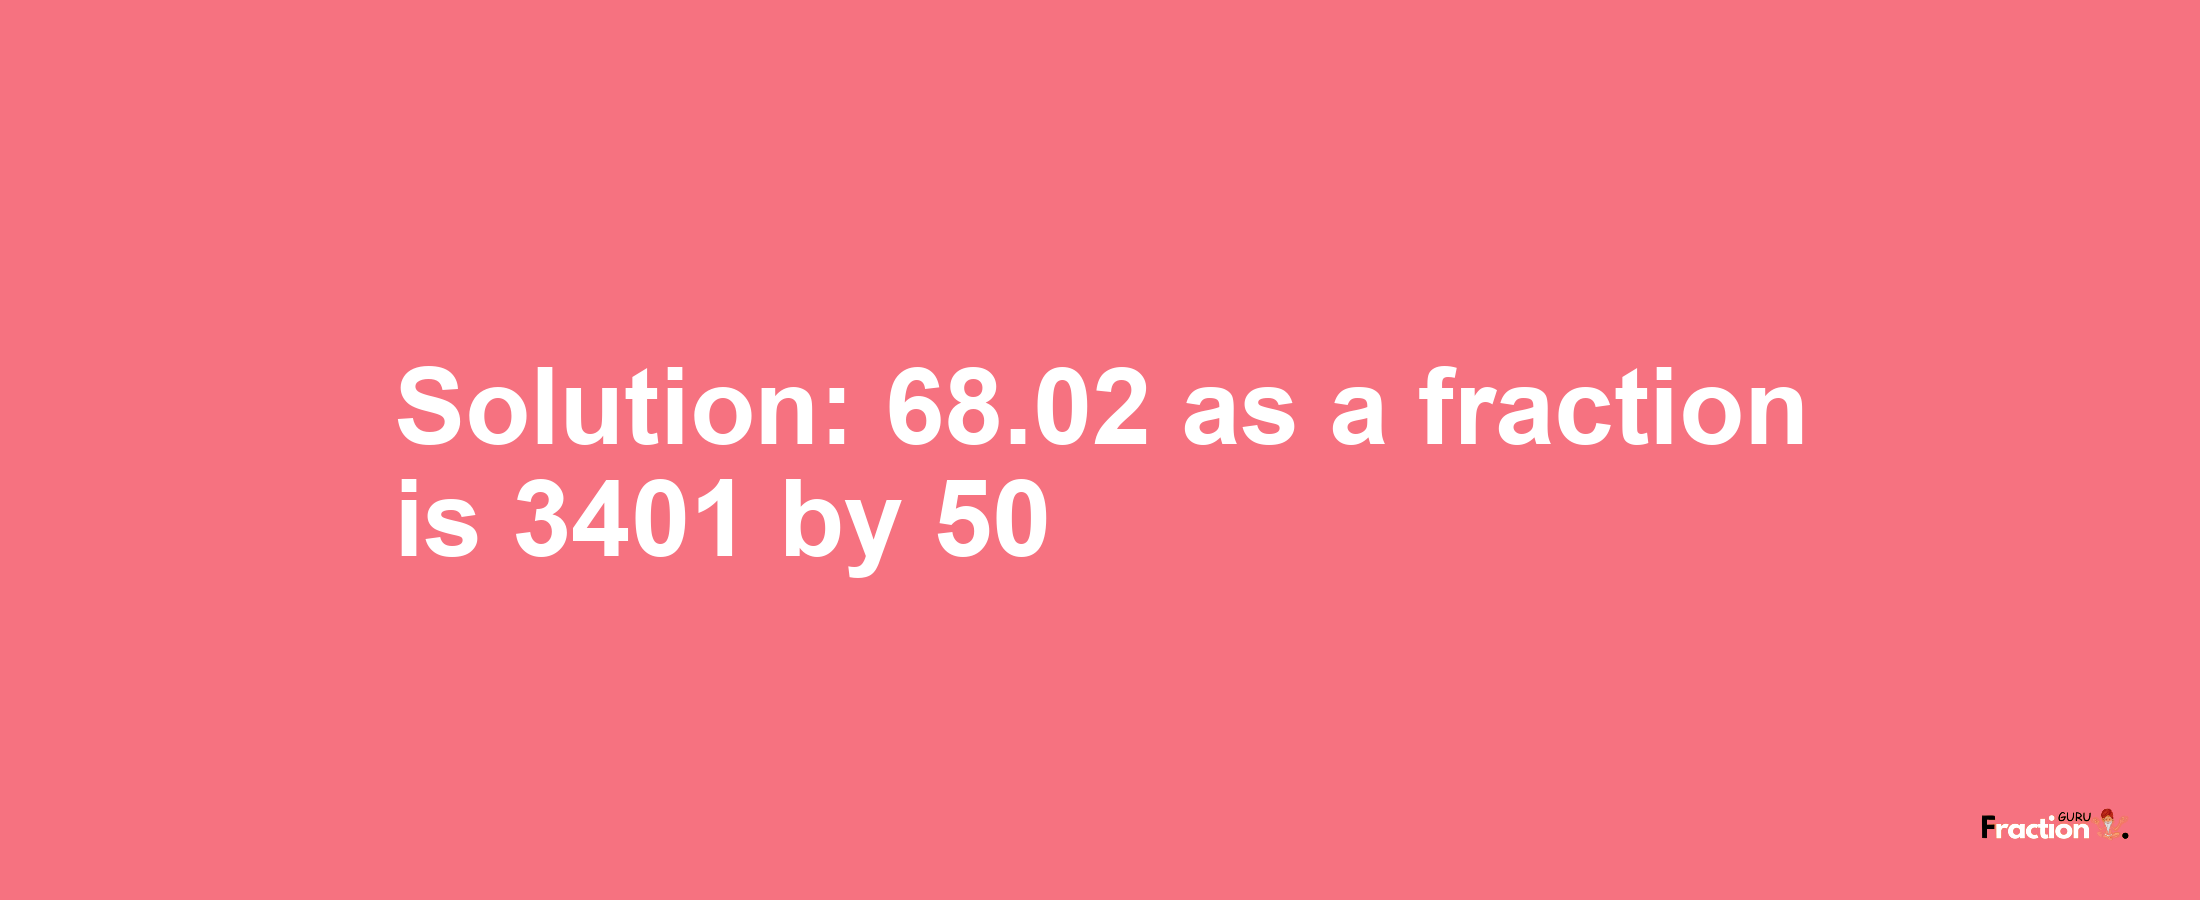 Solution:68.02 as a fraction is 3401/50